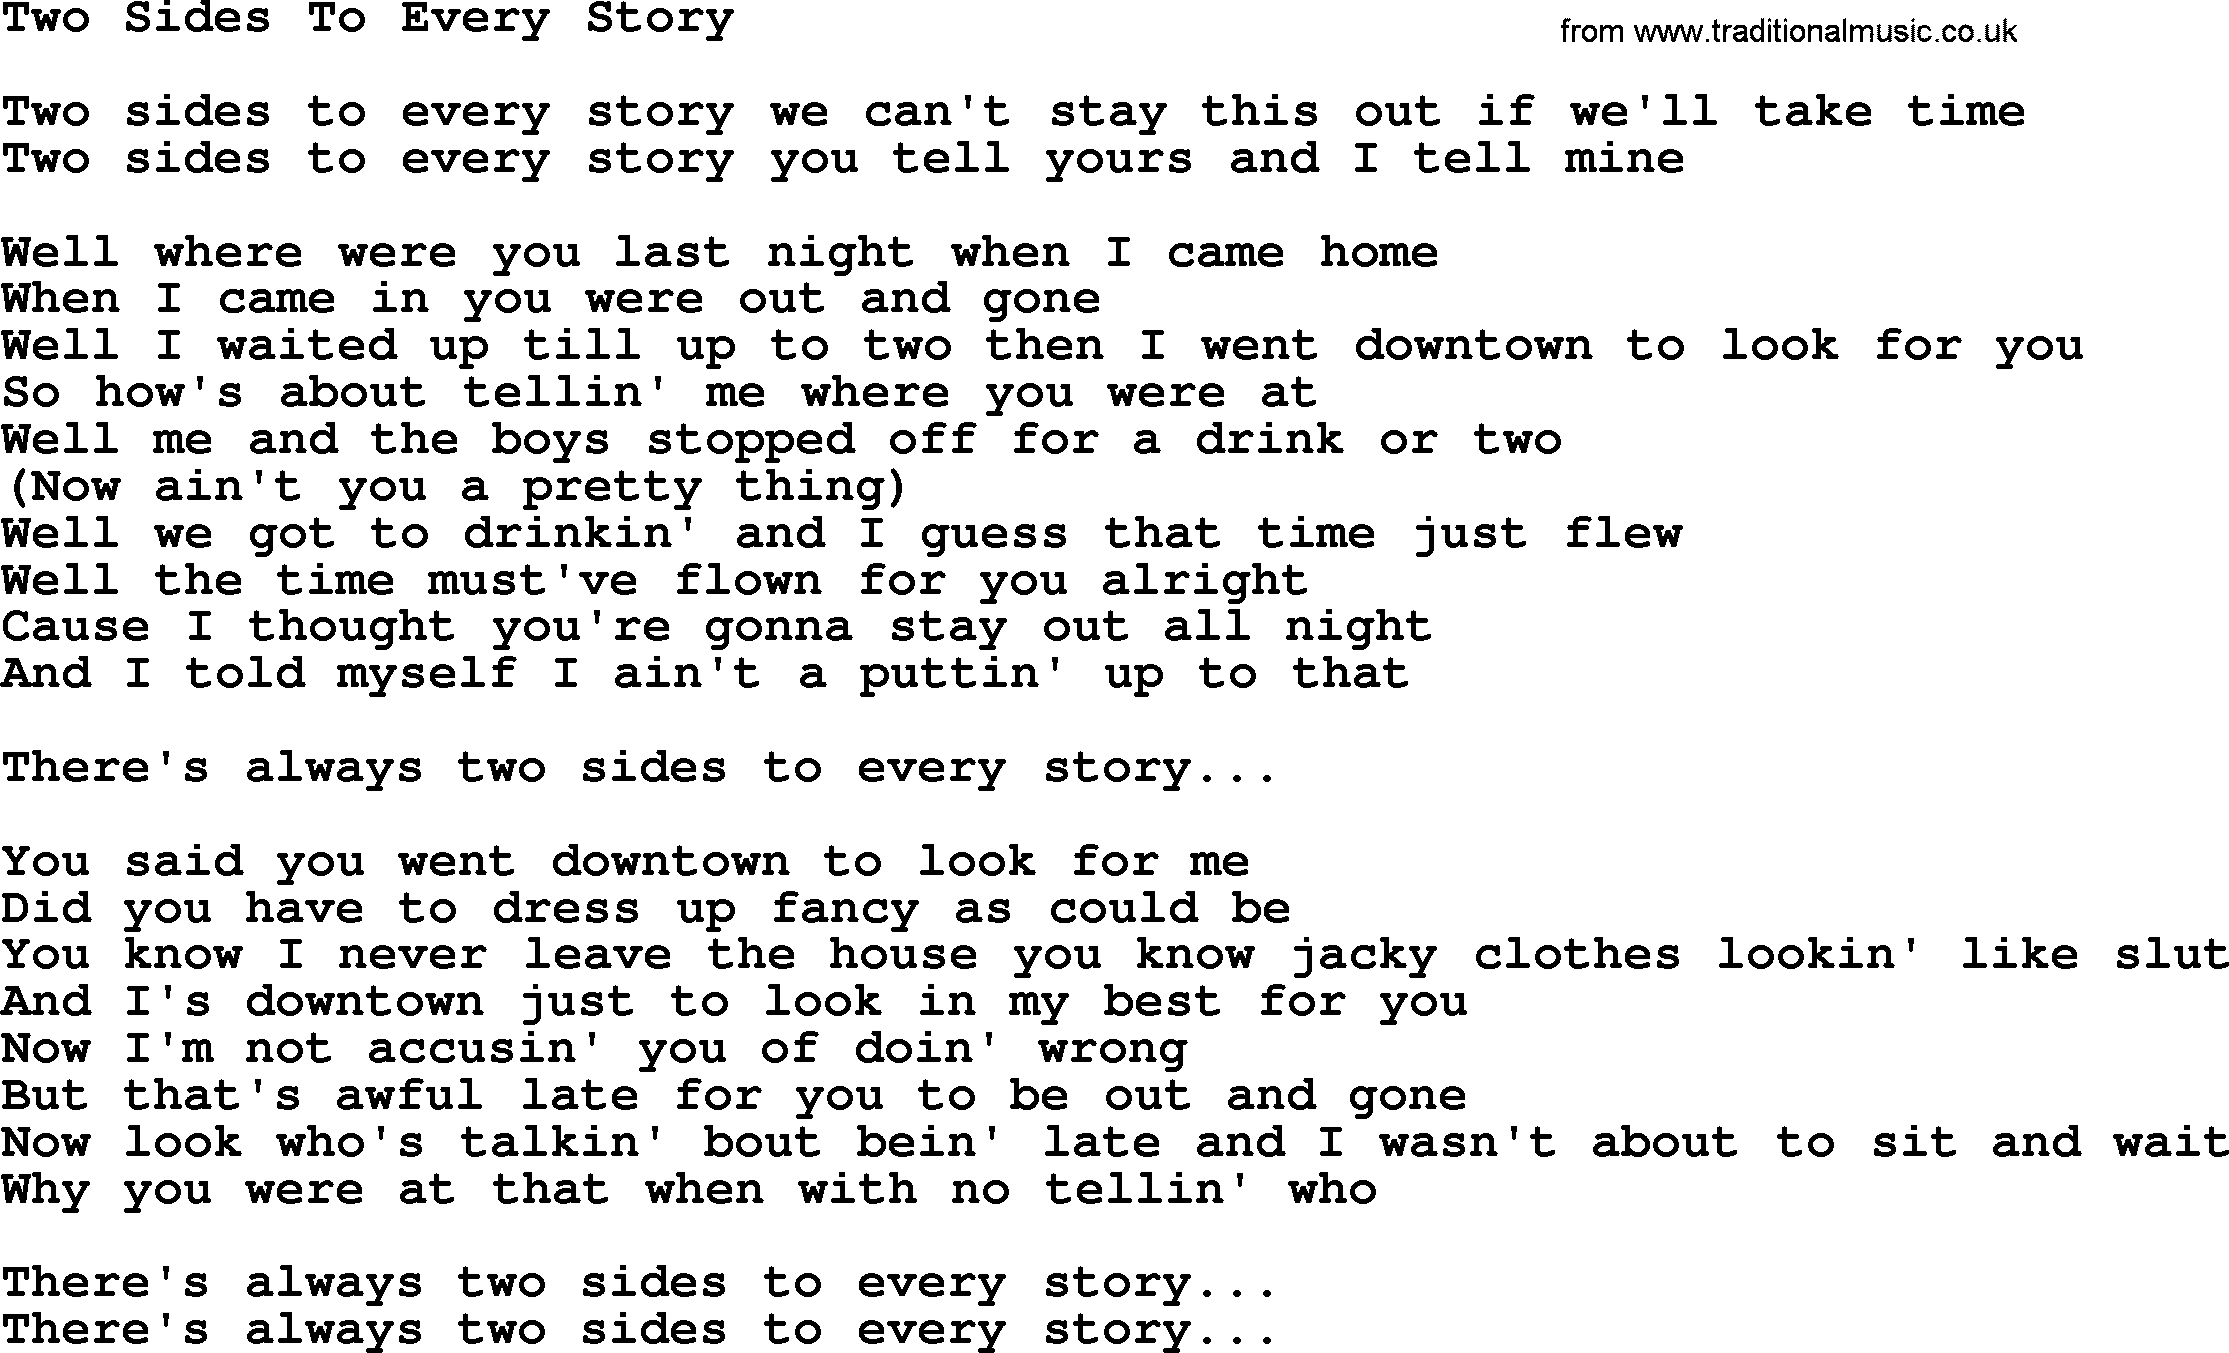 Dolly Parton song Two Sides To Every Story.txt lyrics